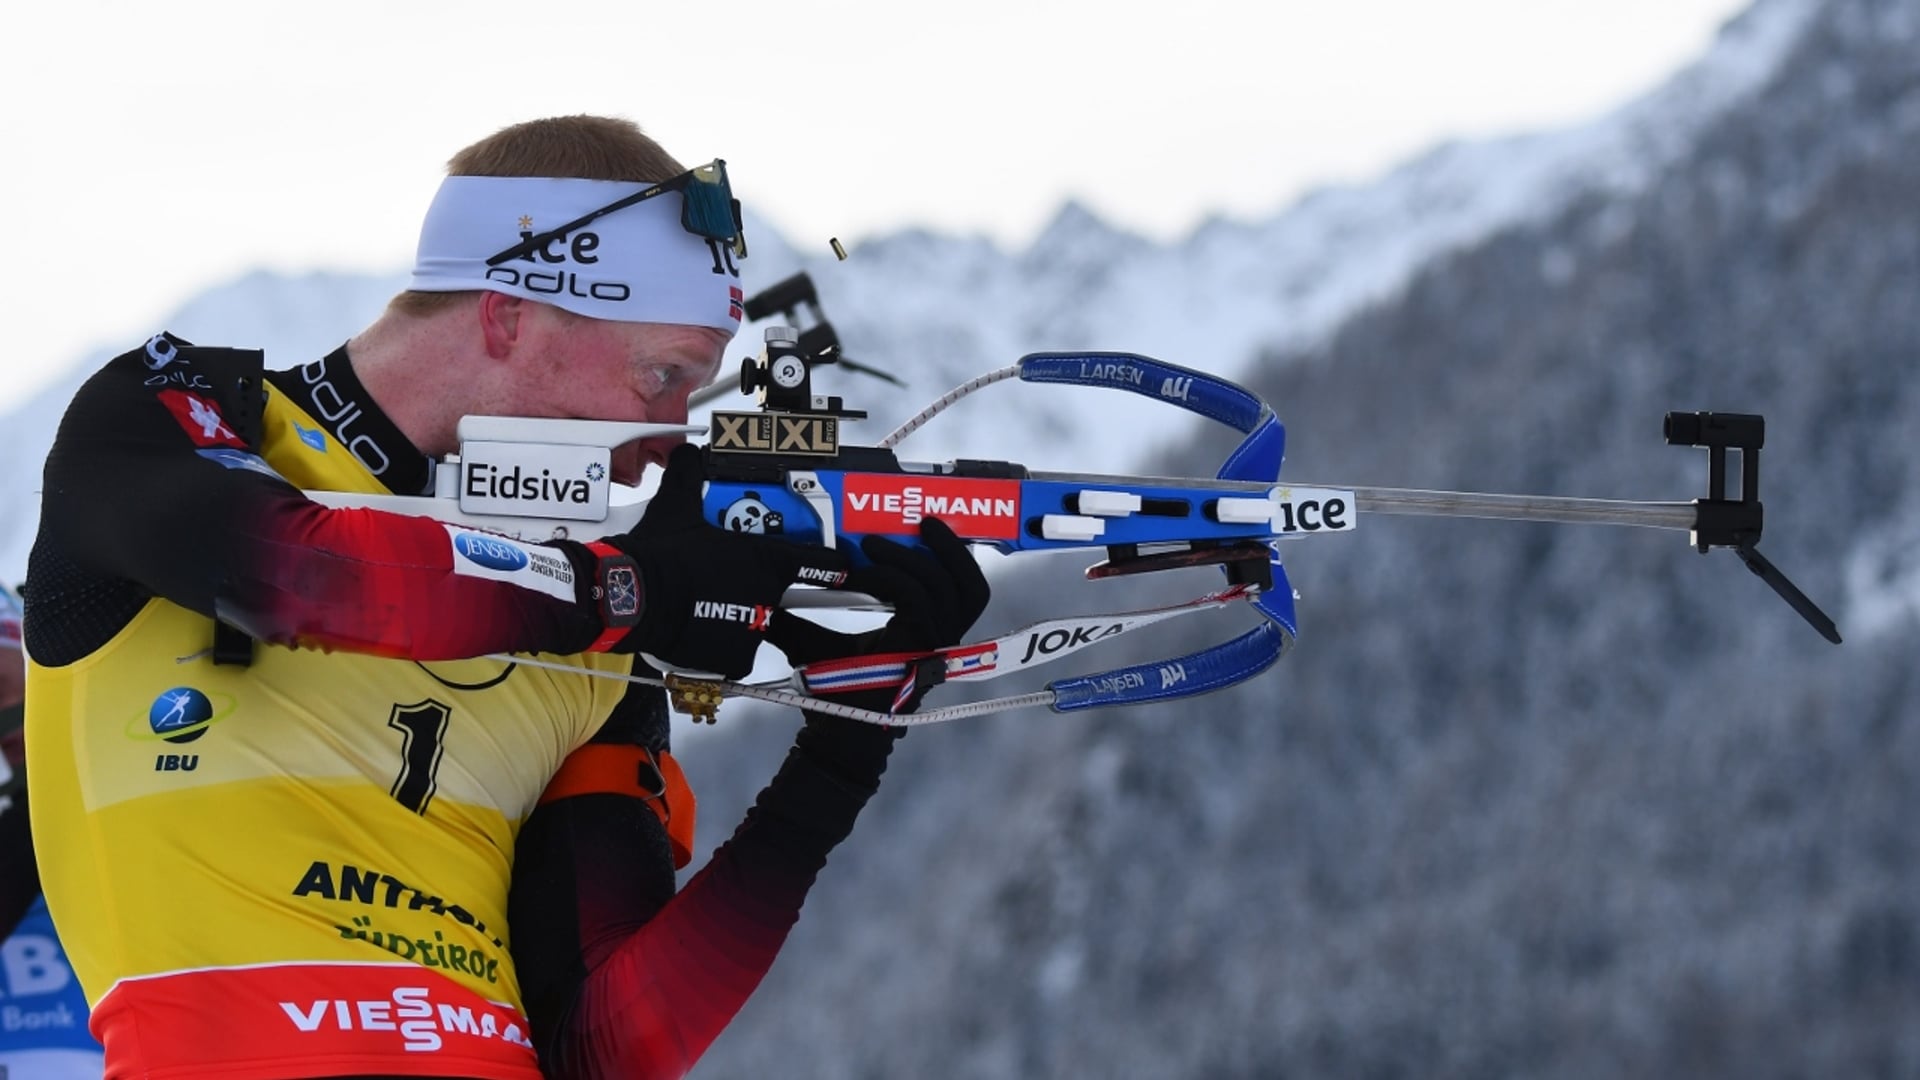 24.01.2021 - Johannes Thingnes Bø Finally Victorious in Antholz